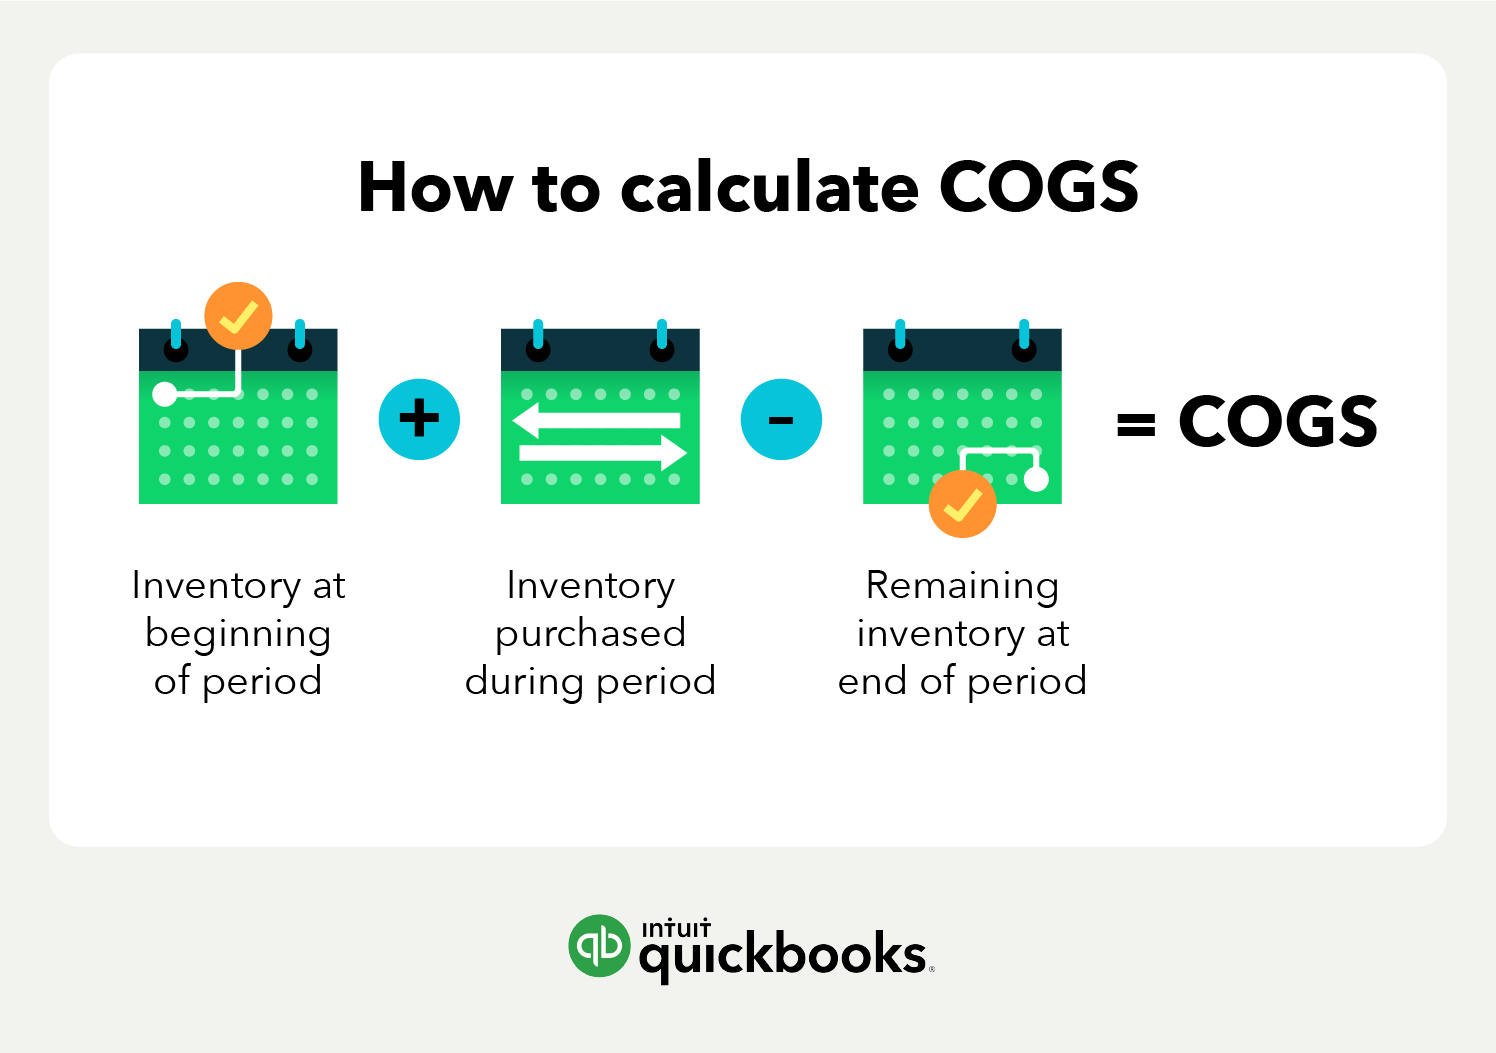 Inventory at beginning of period + Inventory purchased during period - remaining inventory at end of period = COGS